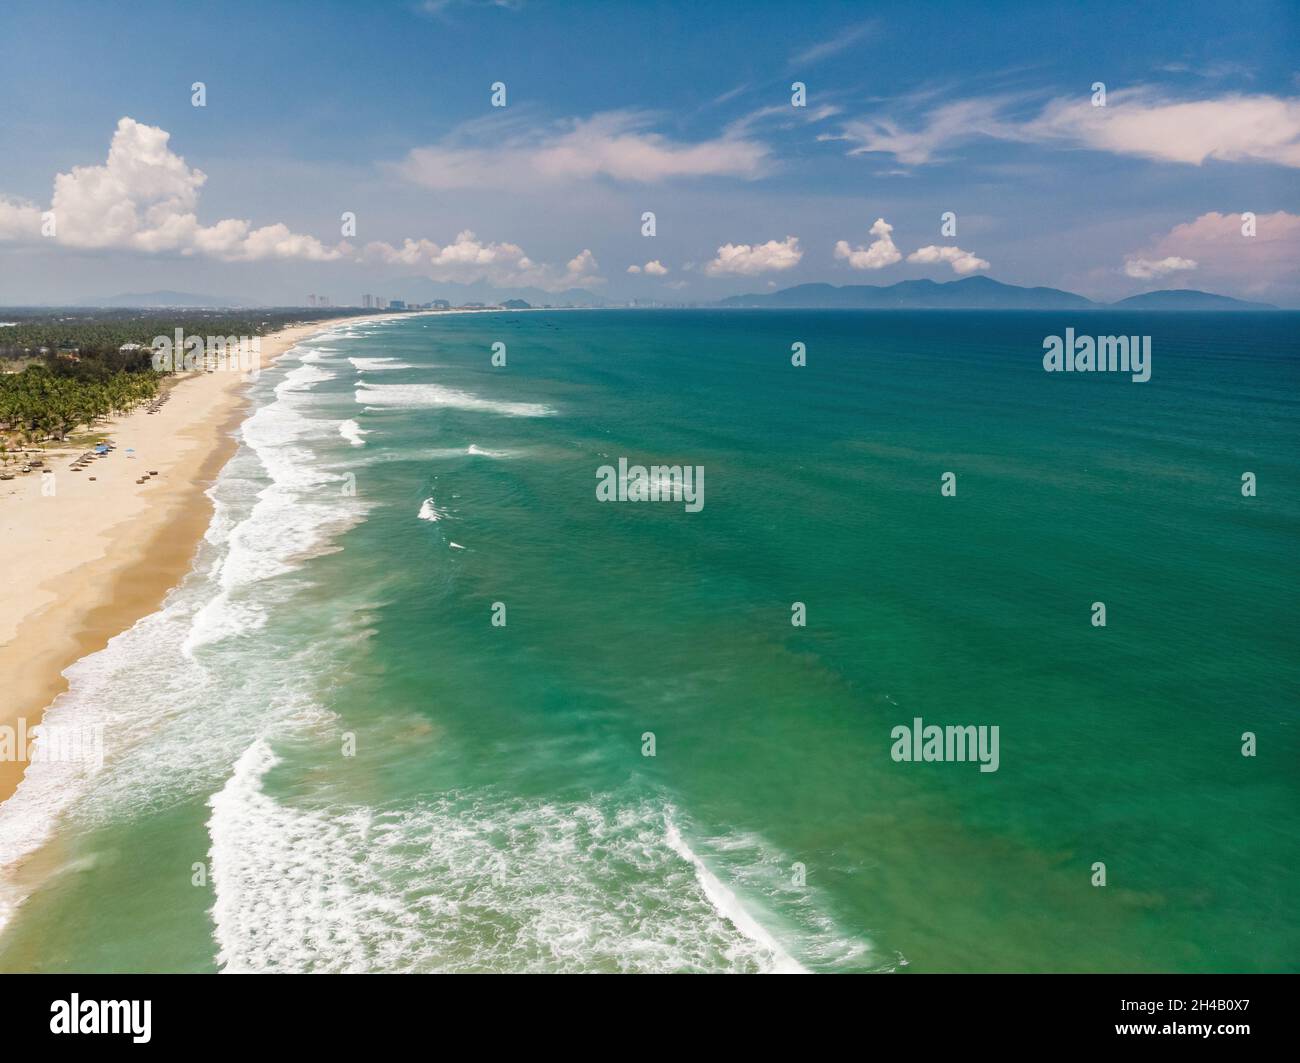 Aerial view of beautiful vietnamese landscape, beach by emerald South China Sea near Hoi An under blue cloudy sky, and distant city Da Nang, Vietnam Stock Photo